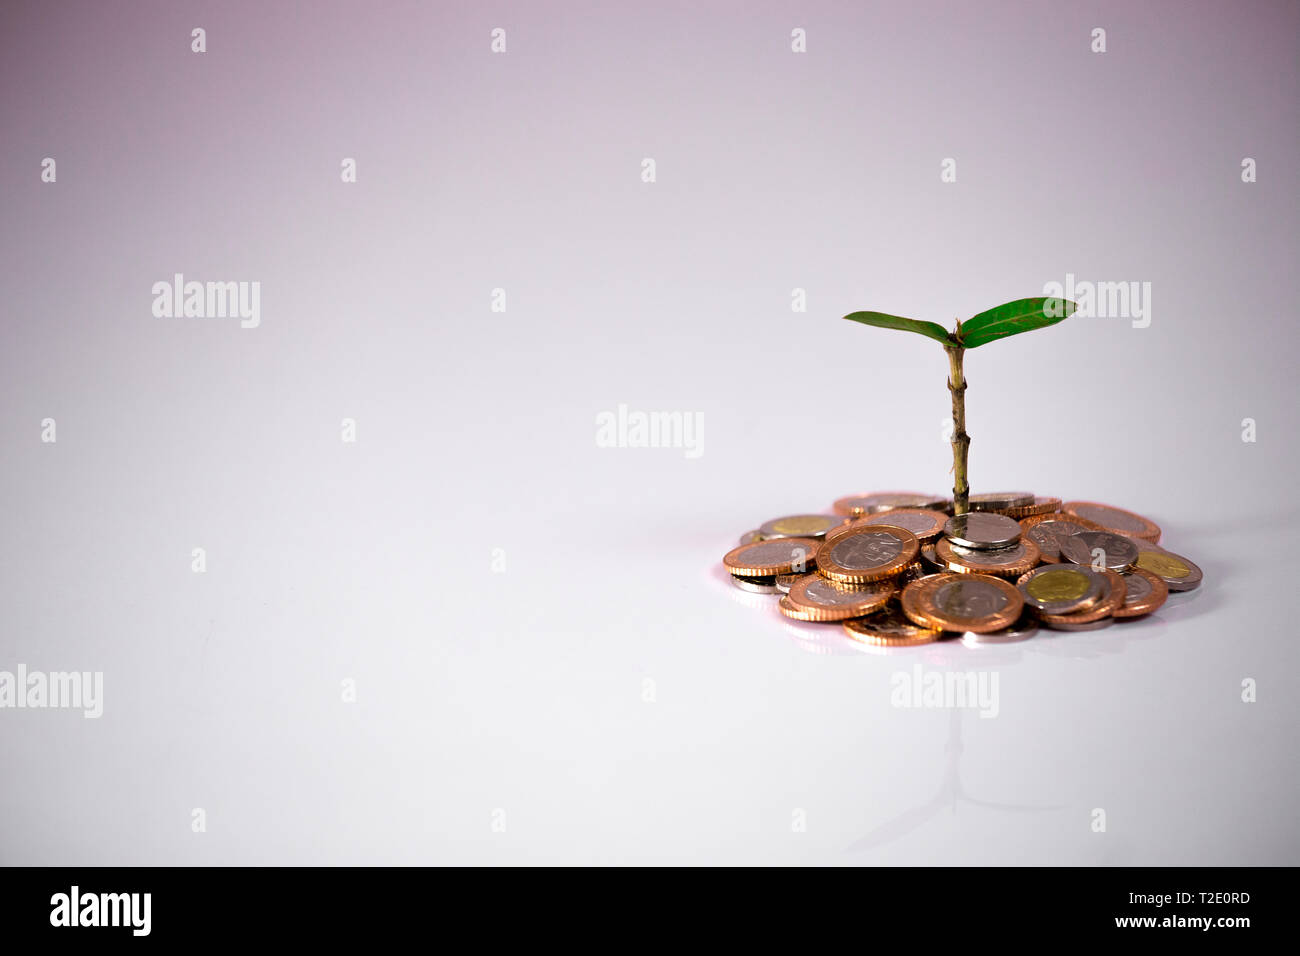 Green plant on coins showing financial growth on white background Stock Photo